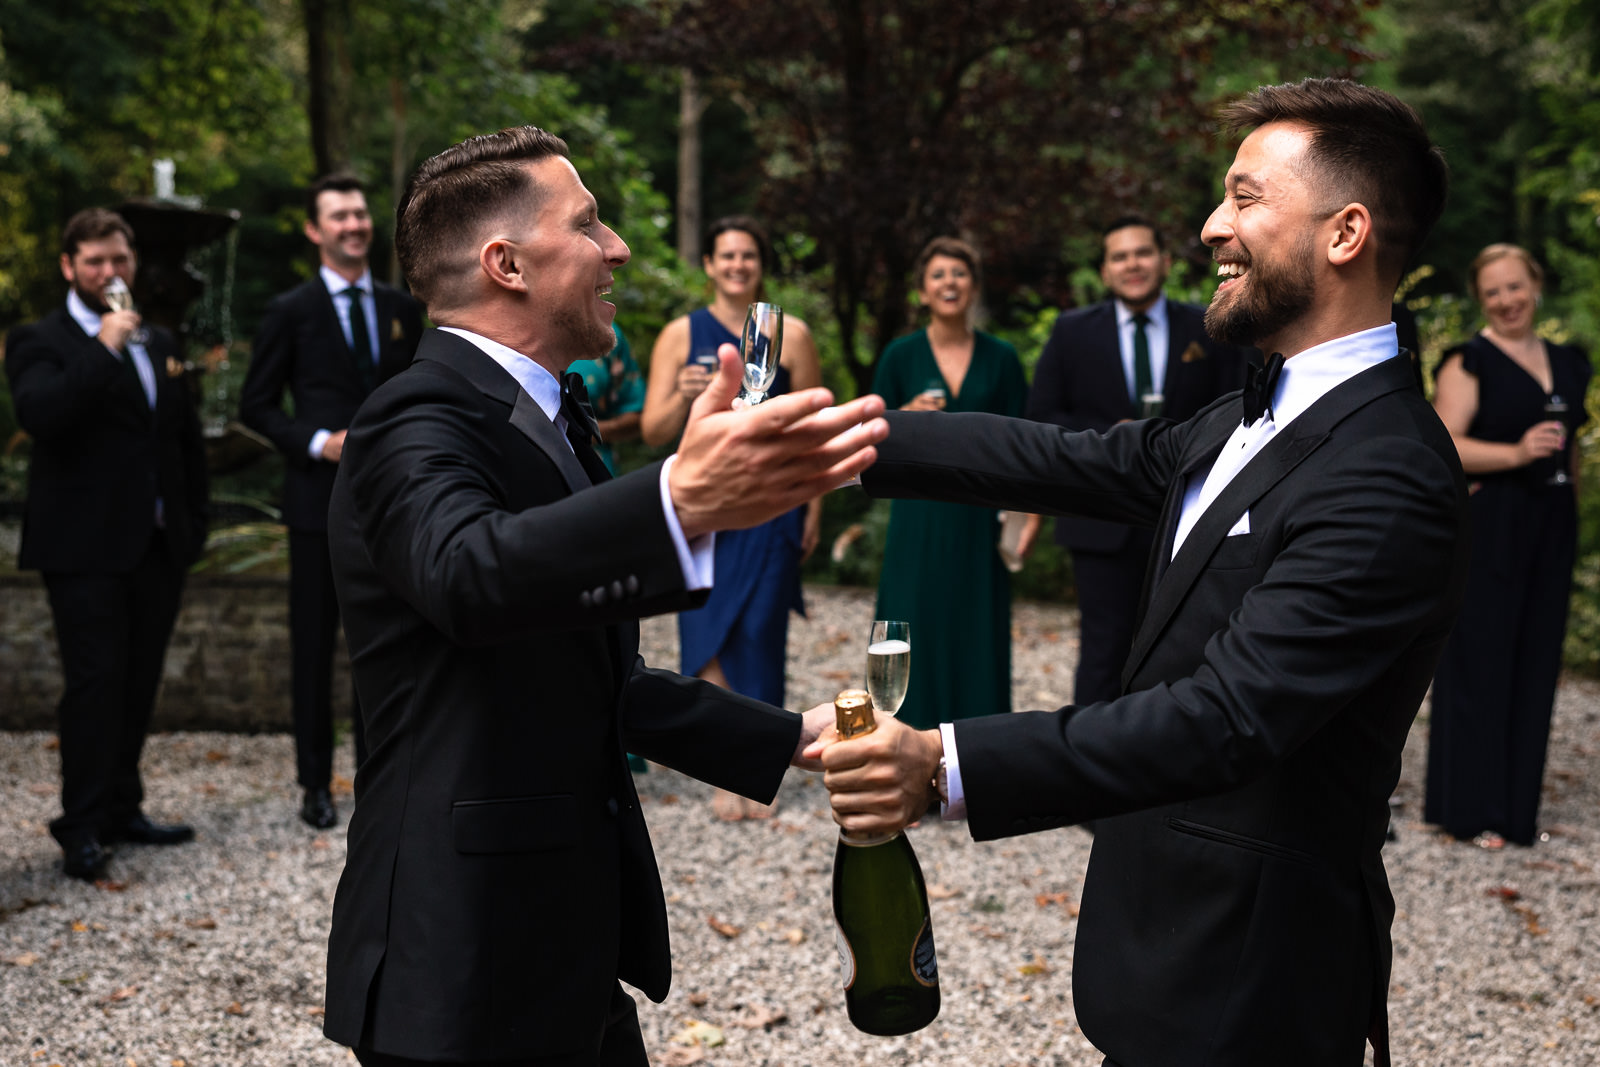 First look grooms at same sex wedding